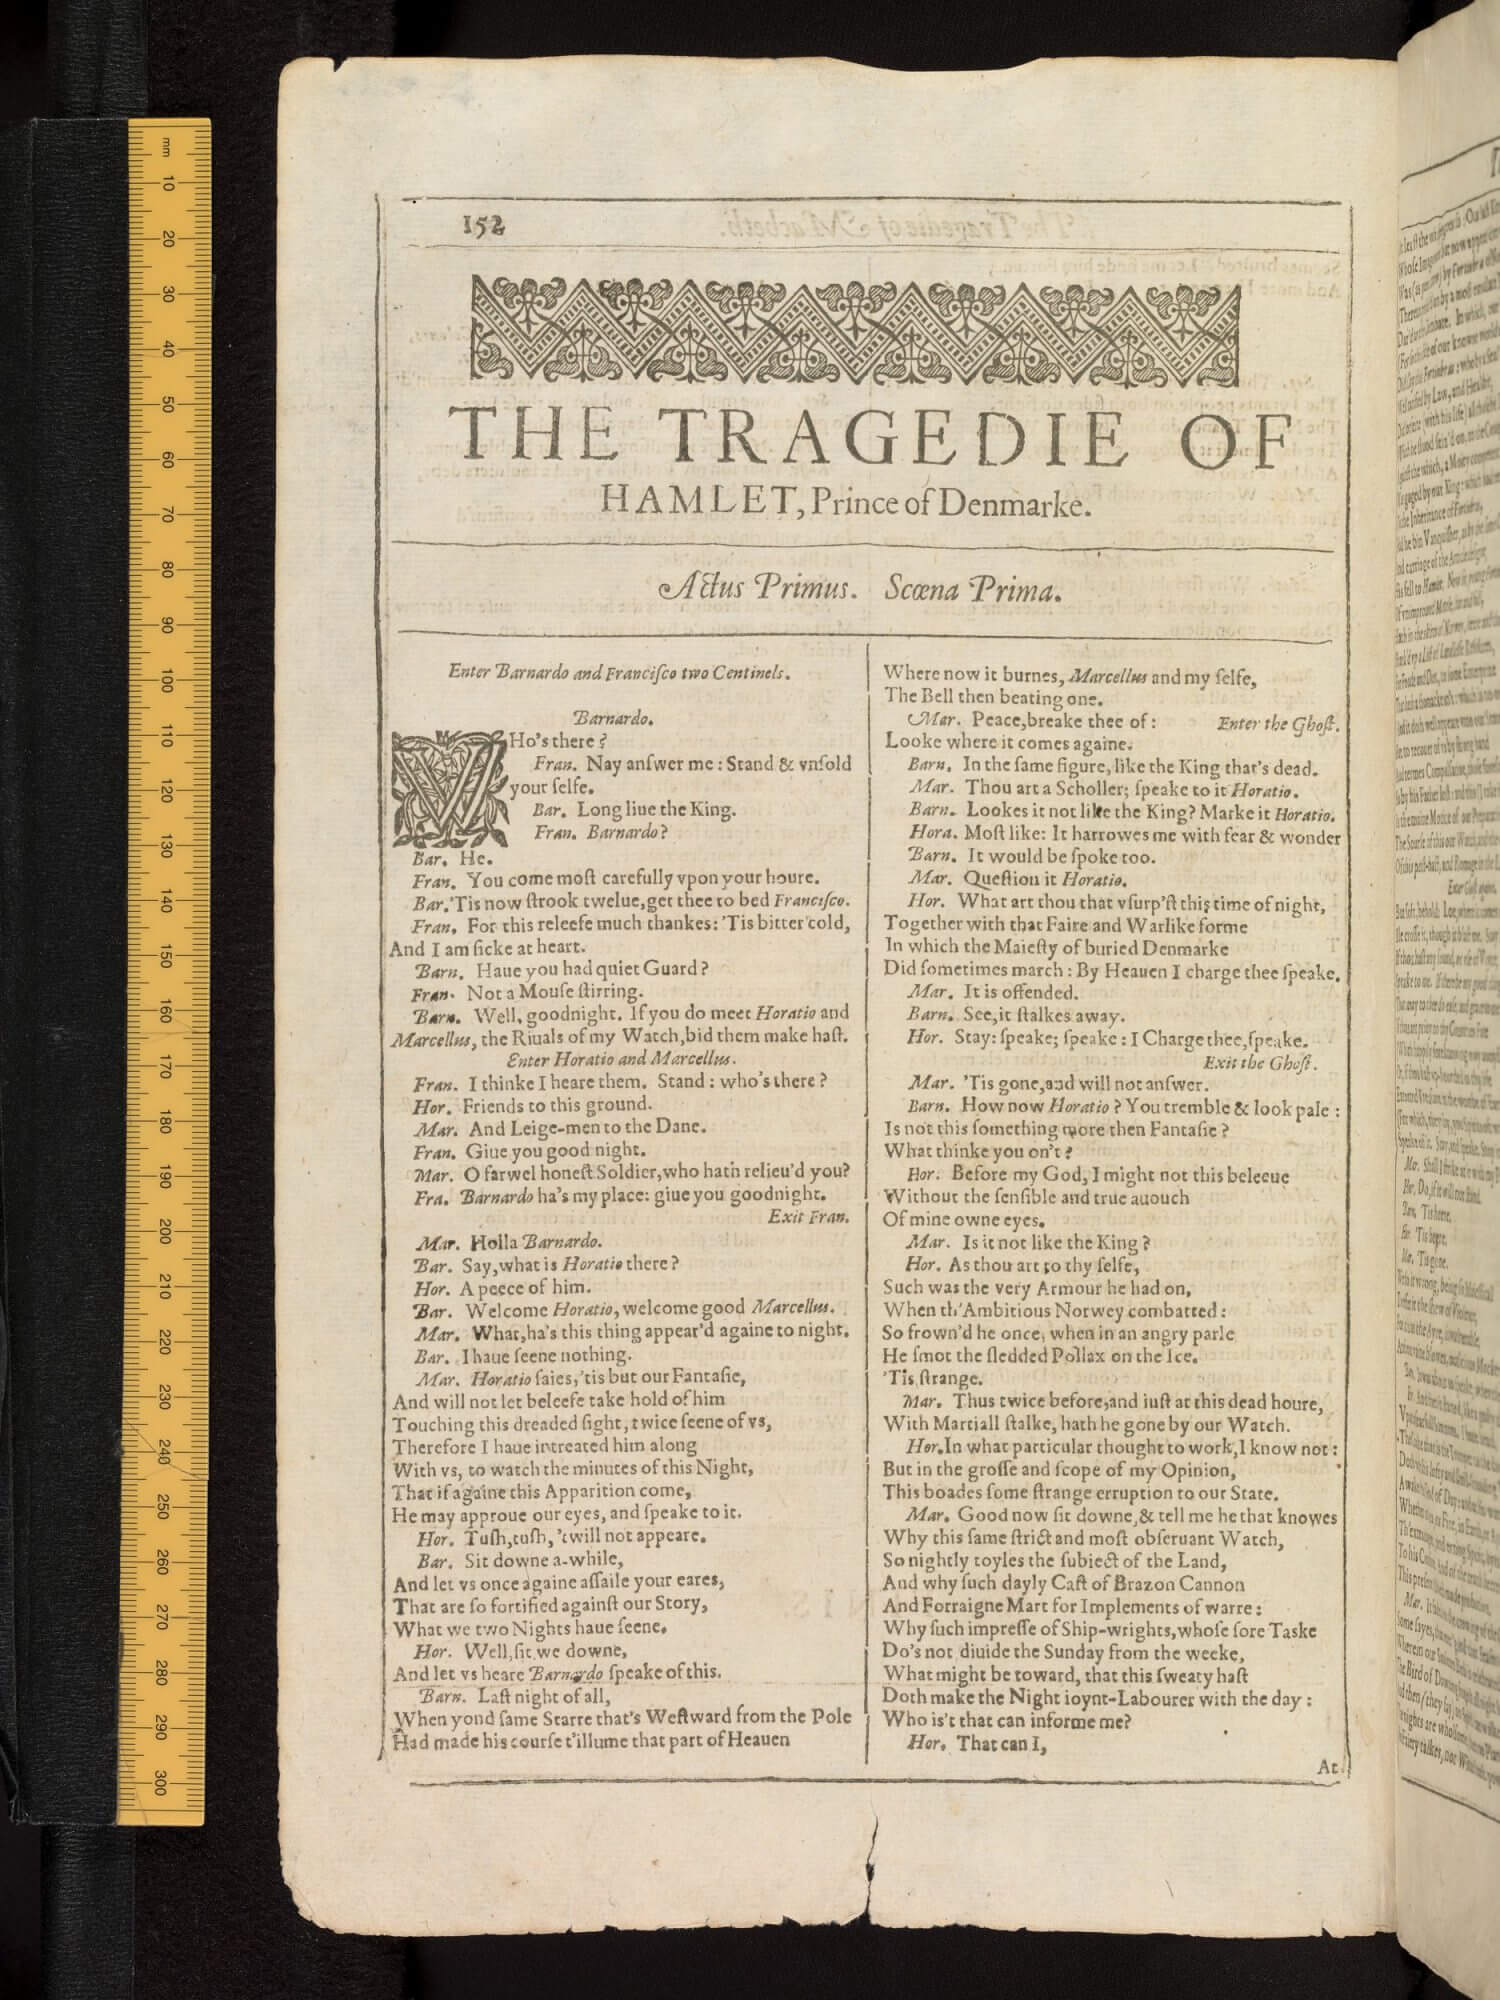 The opening of Hamlet in Shakespeare’s First Folio; like the rest of the plays in this book, the start of the play is marked off with a headpiece and an initial letter.